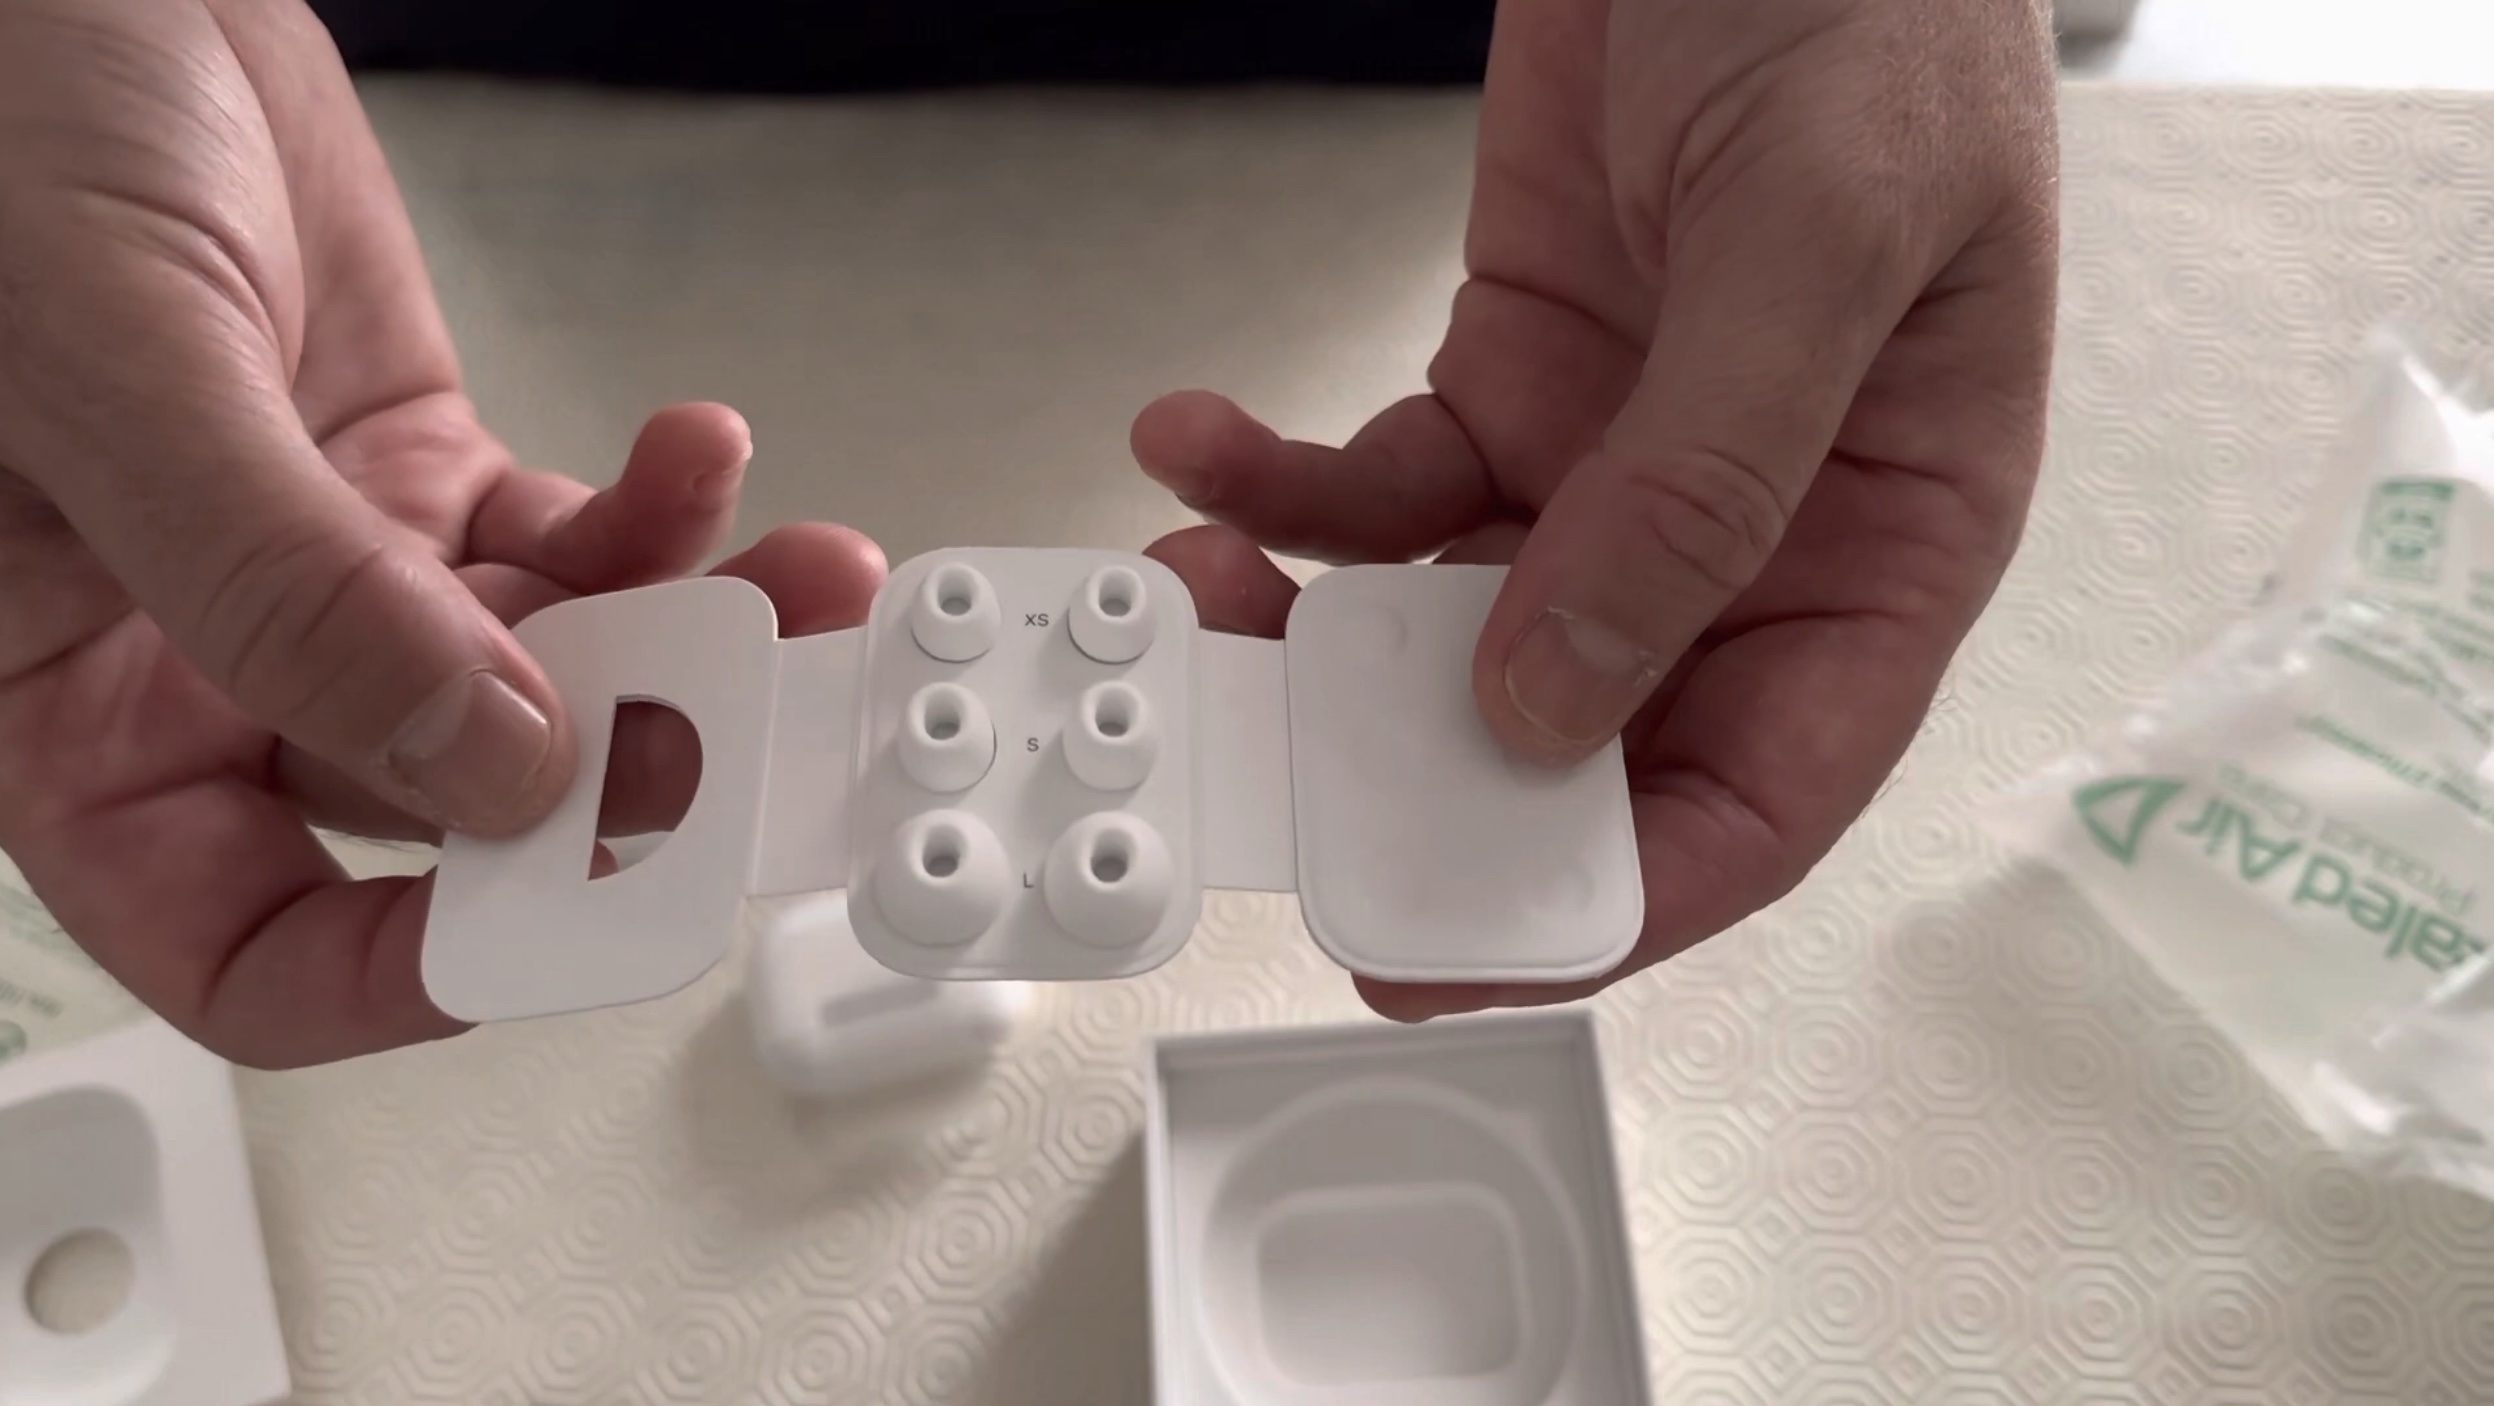 AirPods Pro 2 Unboxing Video Shared Ahead of Launch